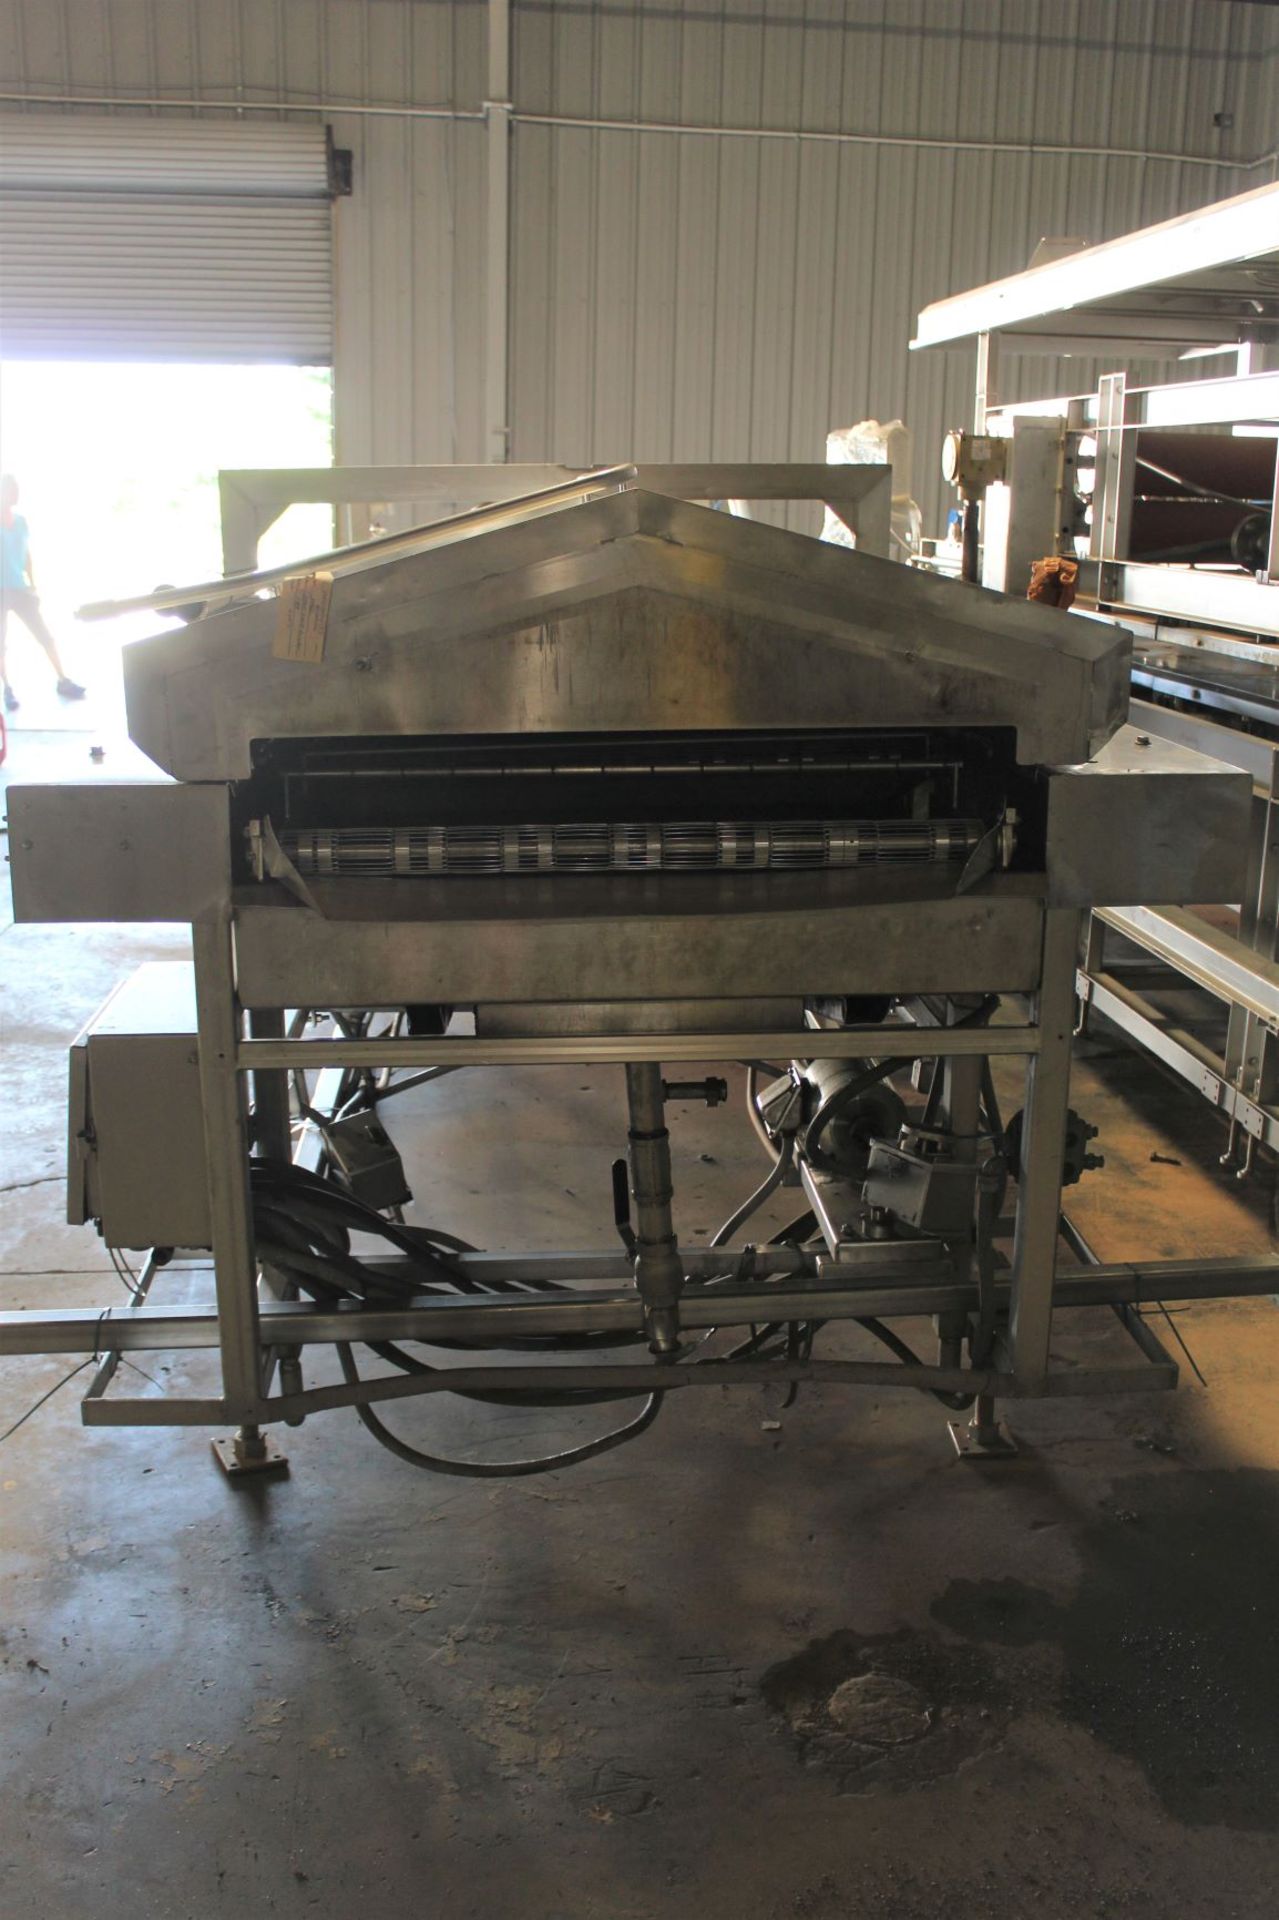 Stein Fryer, Model# DHF-3413, Serial# 195, Item# bbncstefry195, Located in: Cartersville, GA - Image 2 of 4